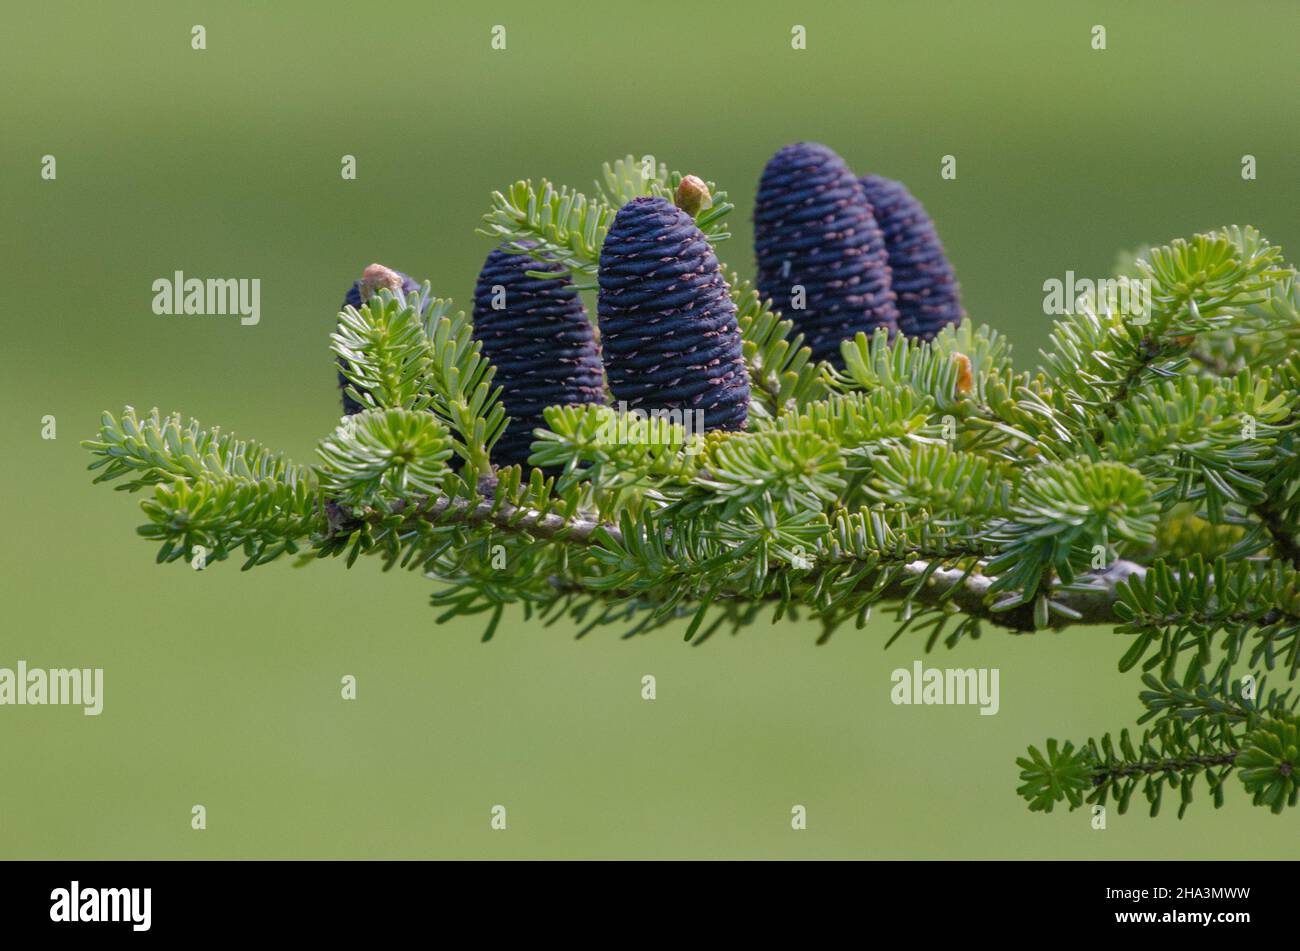 The upright, blue cones of a Korean Fir set against a green background. Stock Photo